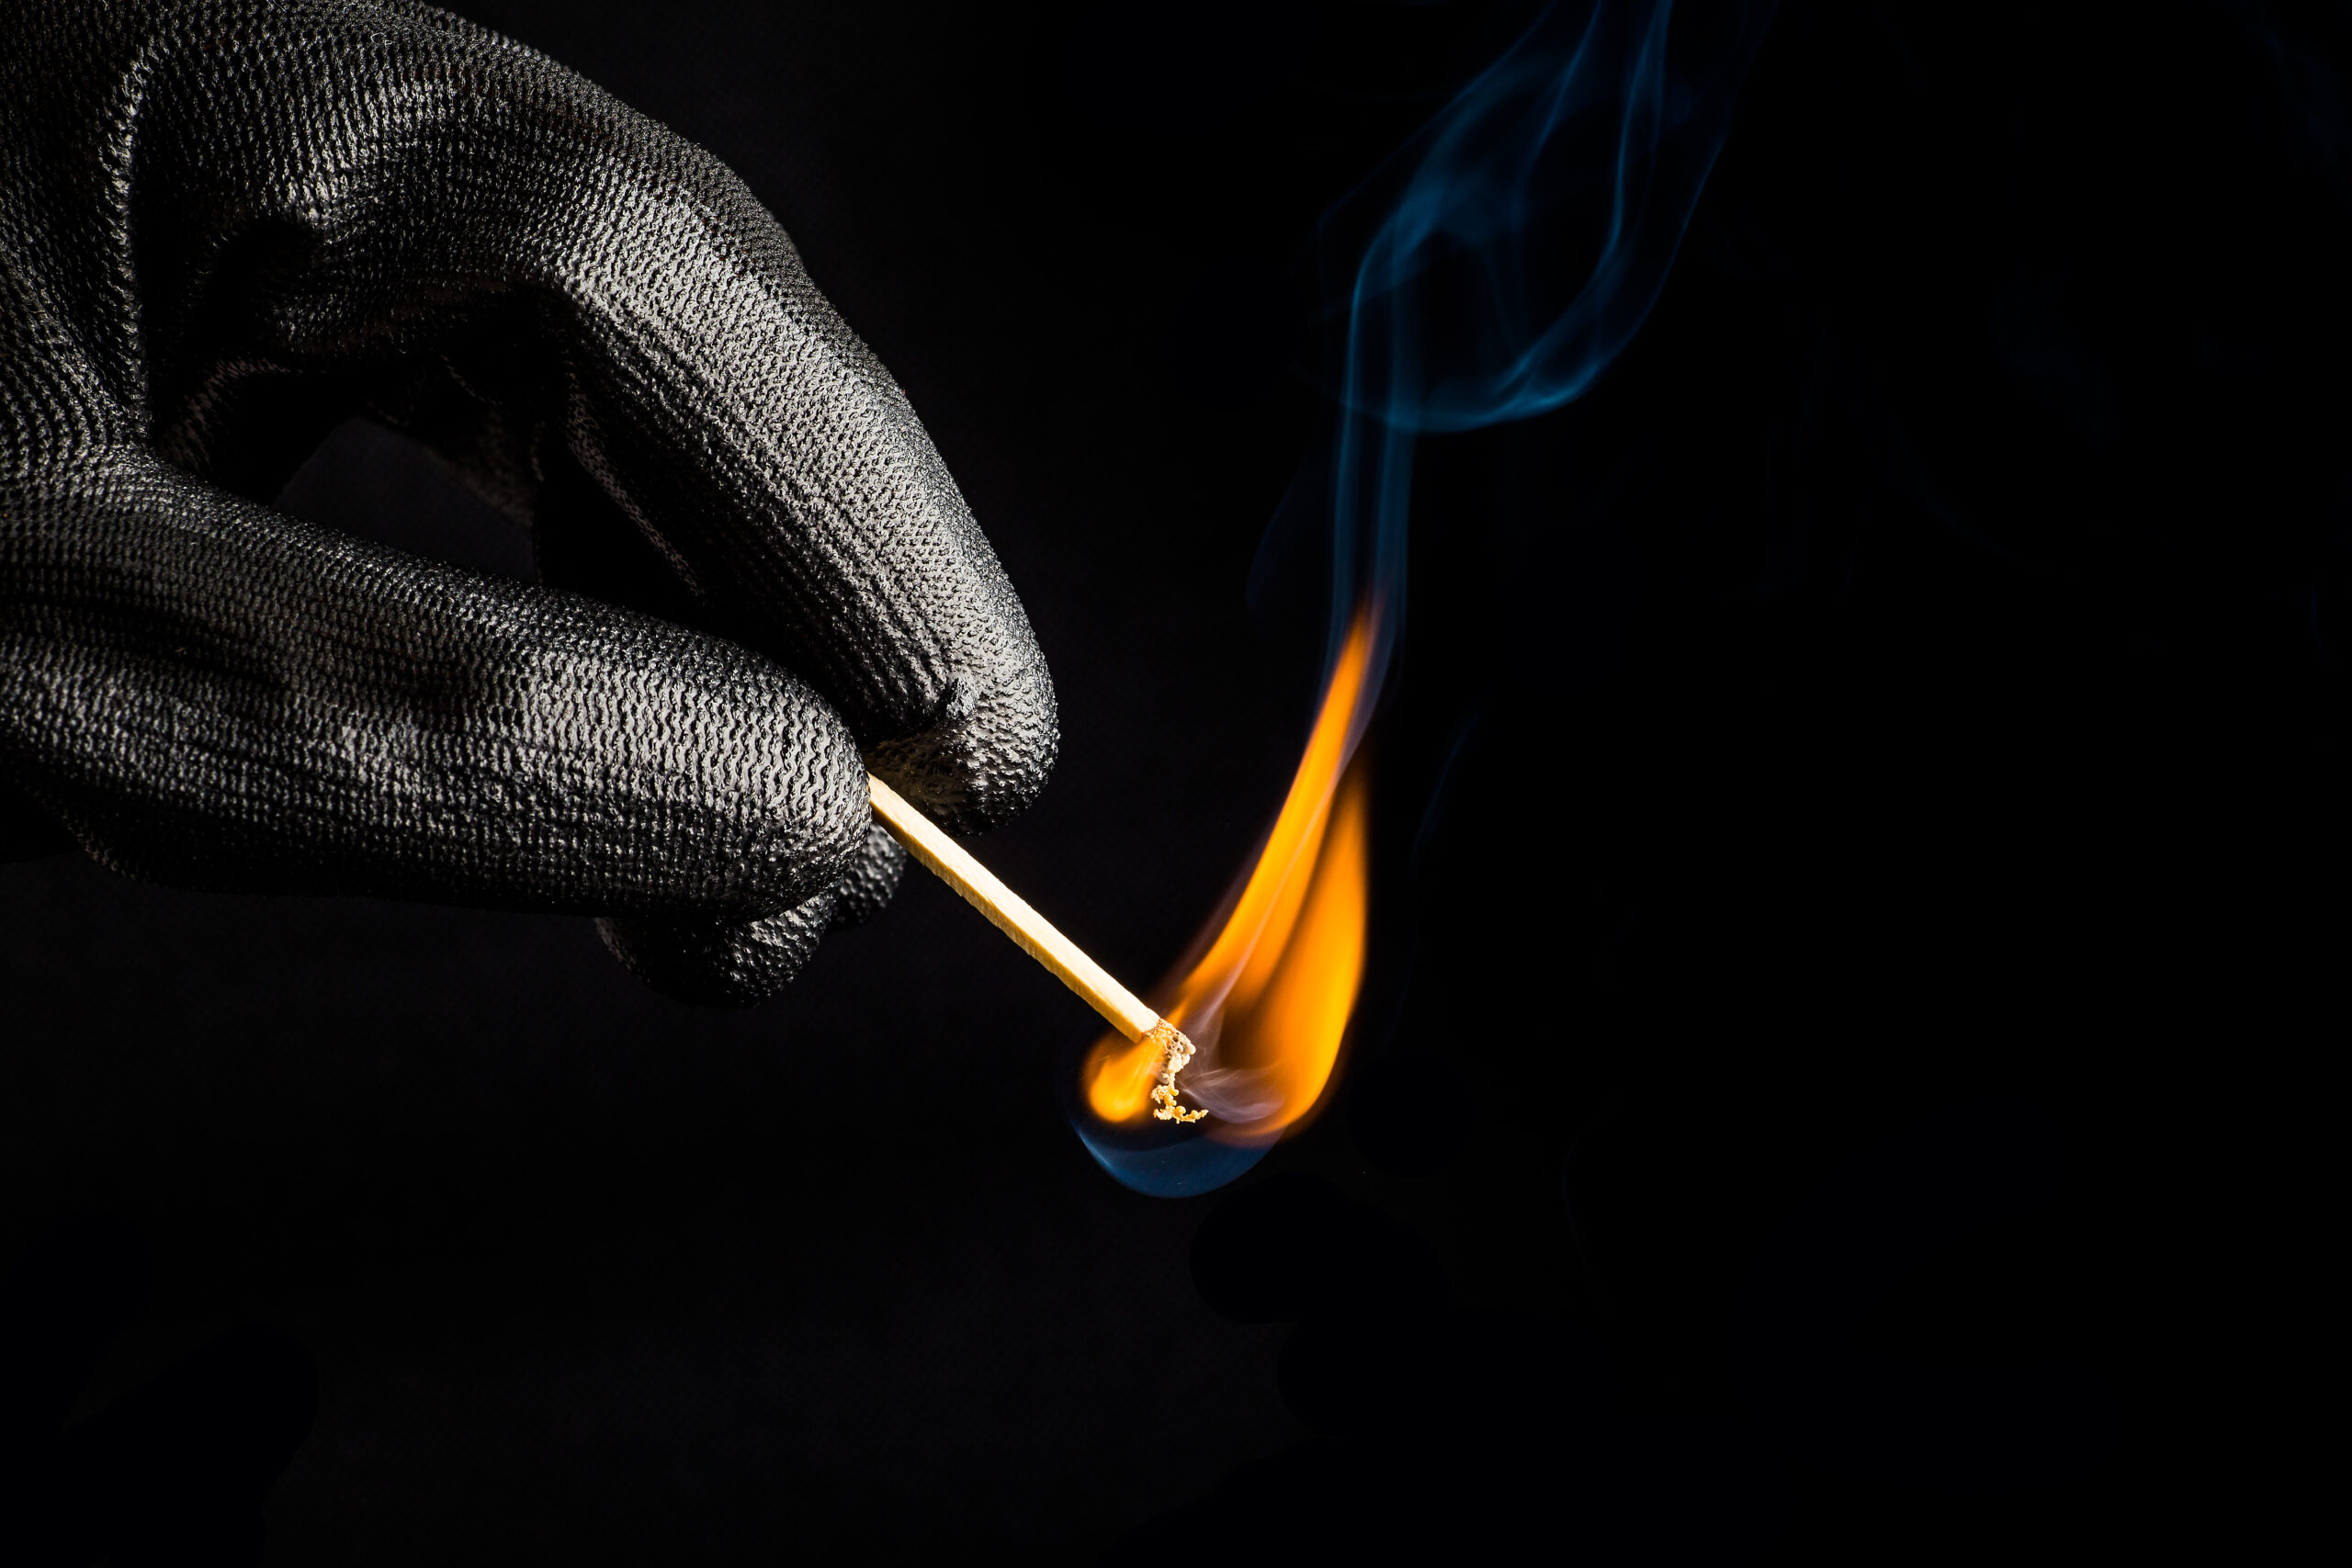 A close-up image of a hand in a silver textured glove holding a lit match, implicated in arson in New Jersey, with a bright orange flame and swirling smoke against a dark background.